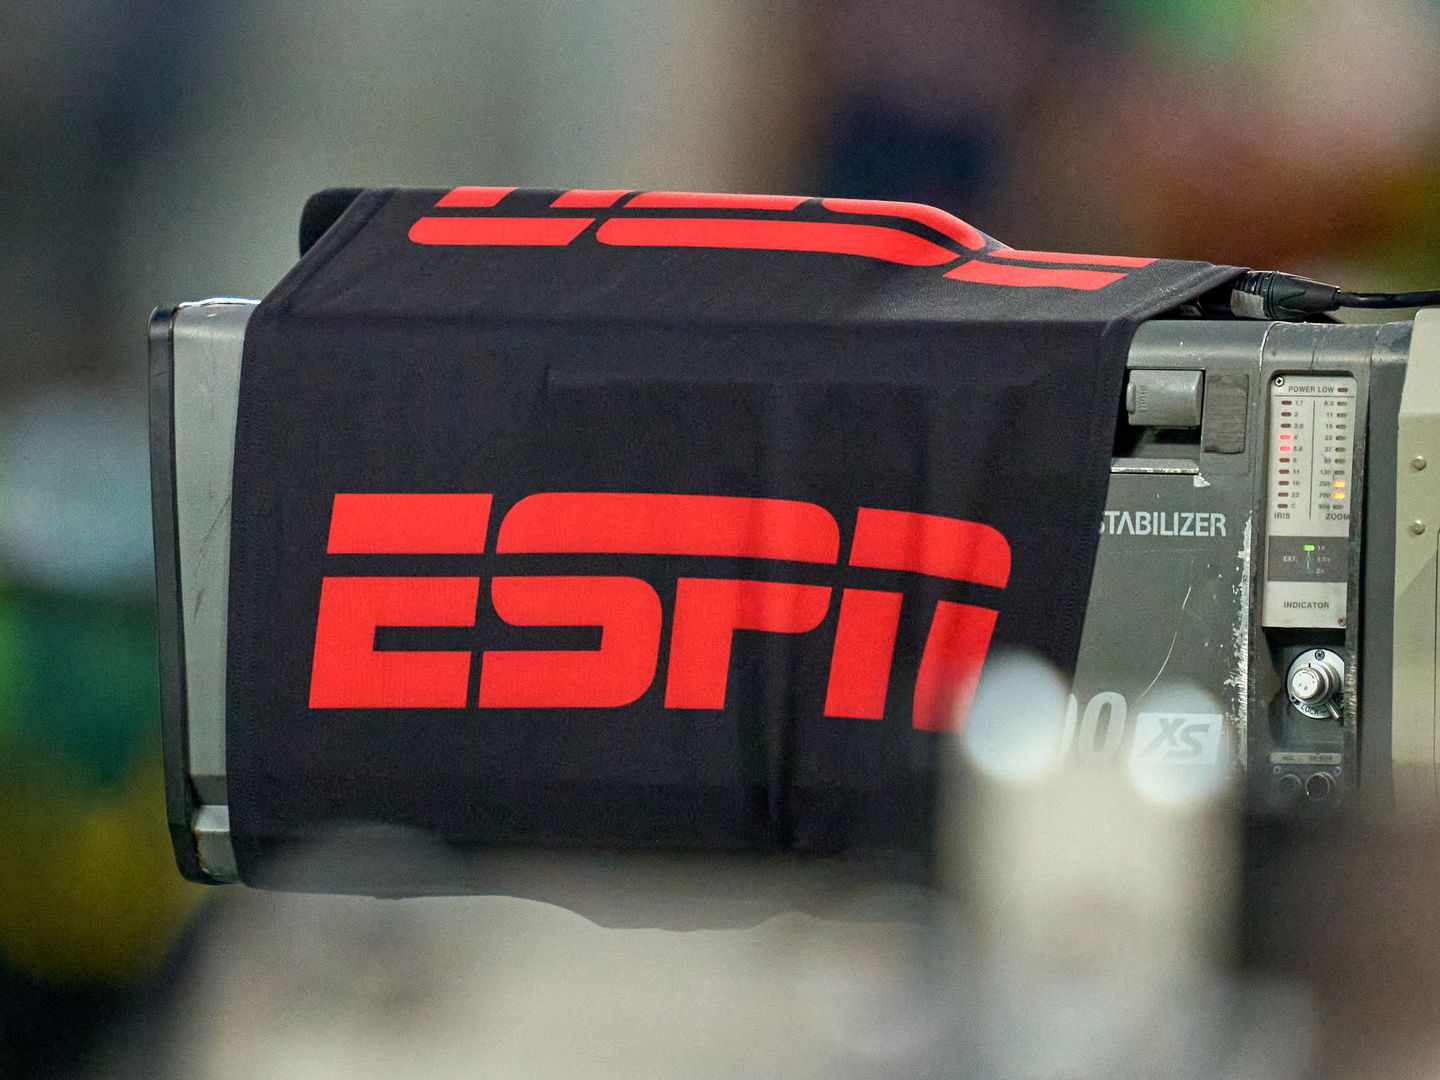 Latest TV blow for sports fans: No ESPN for 15 million cable customers